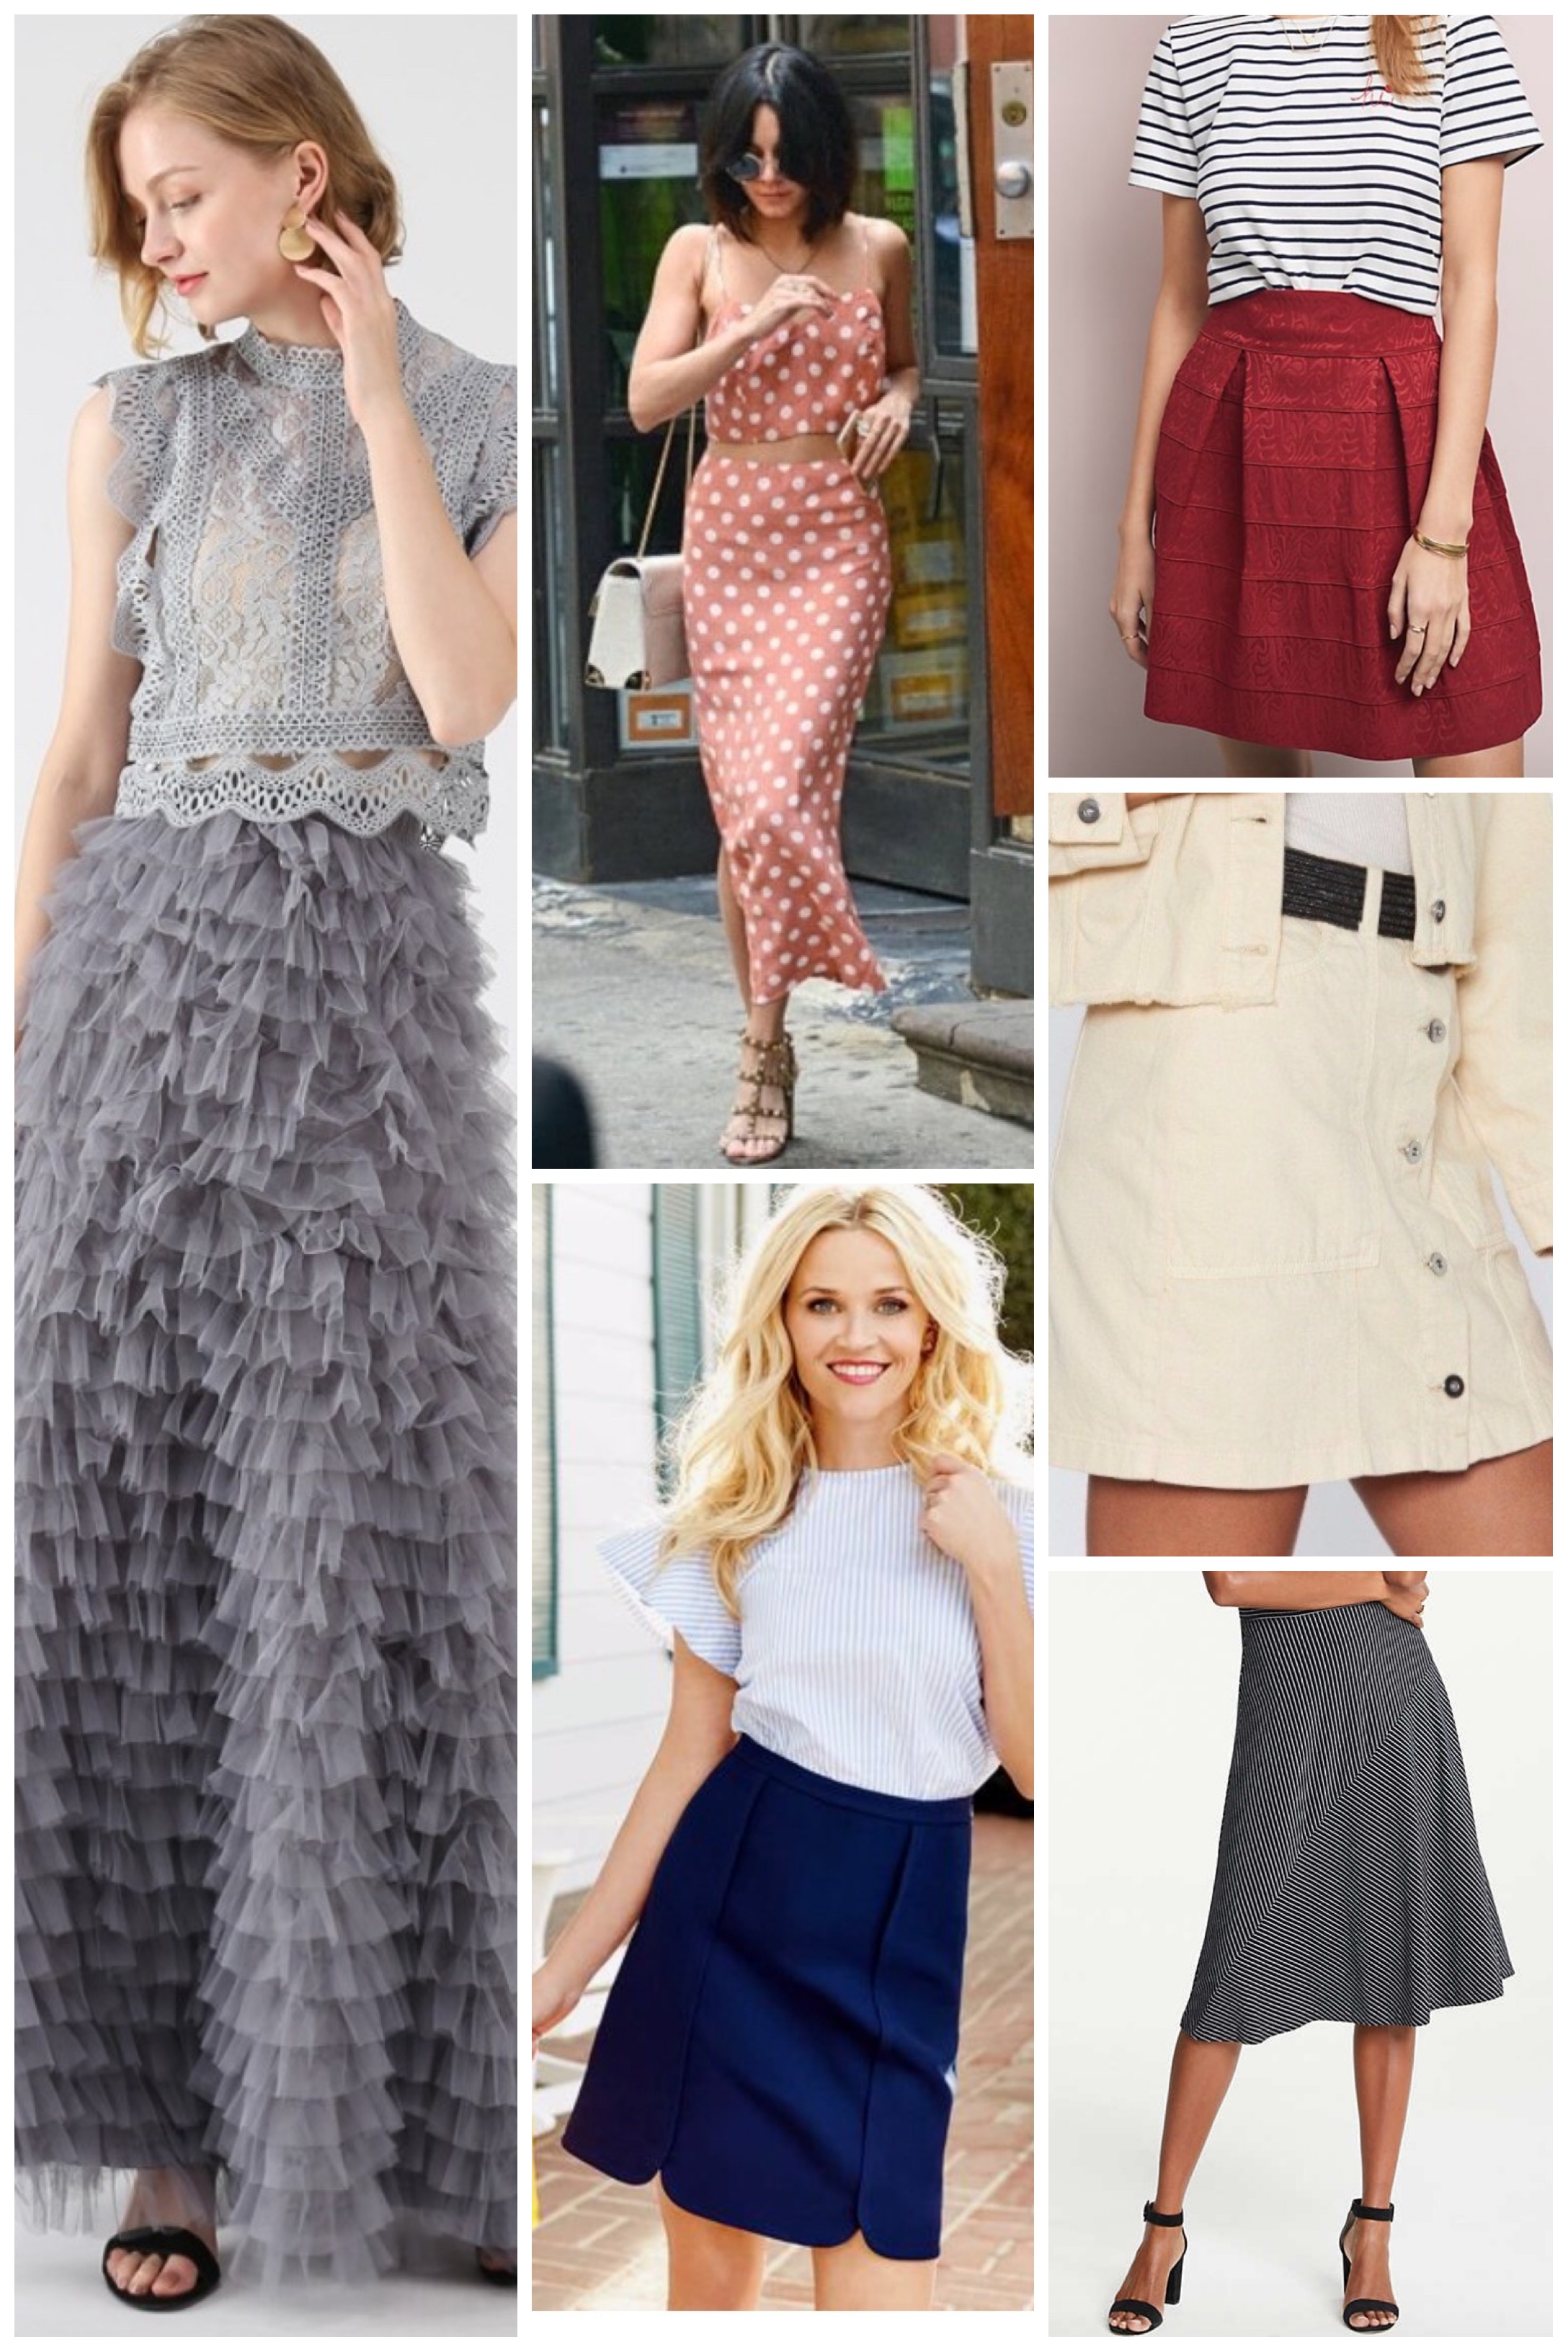 Petite Style Tips: Skirts